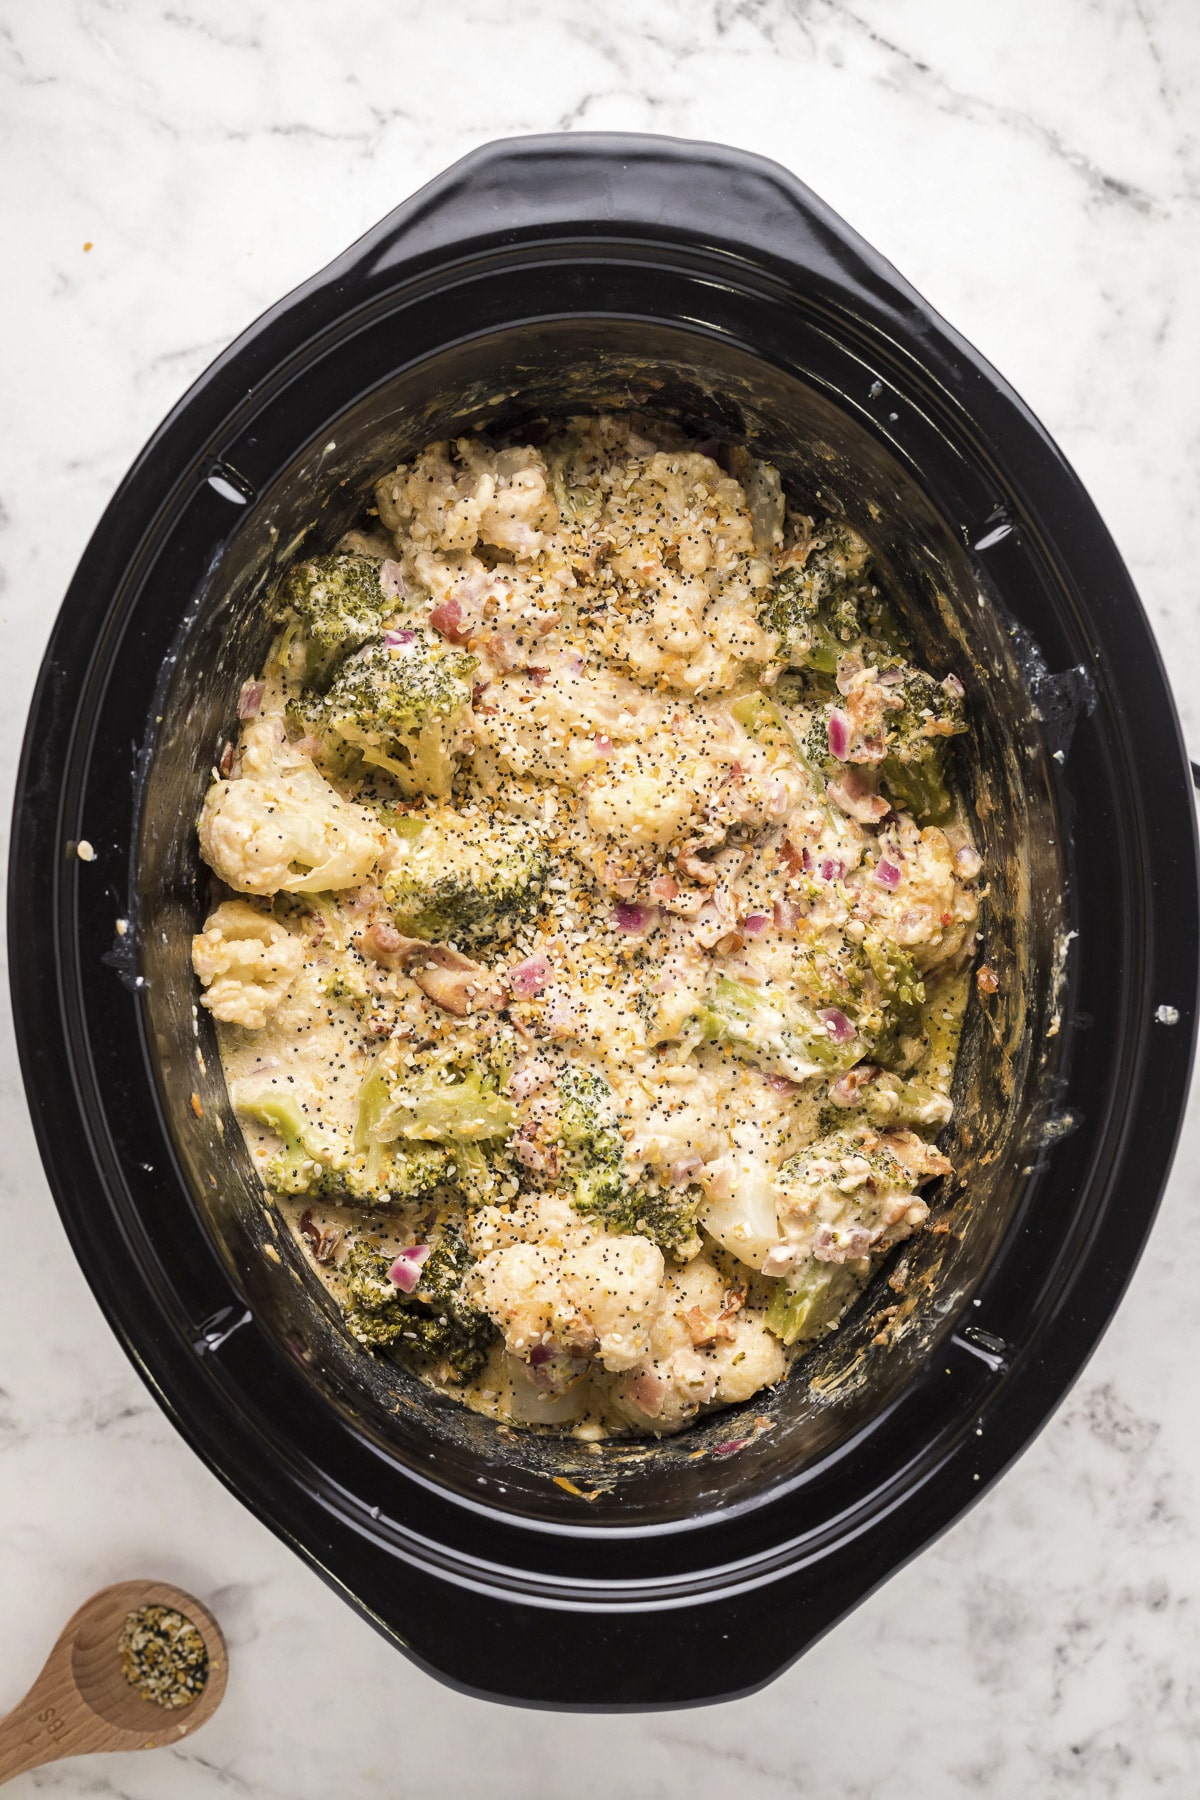 cooked cauliflower and broccoli casserole in slow cooker